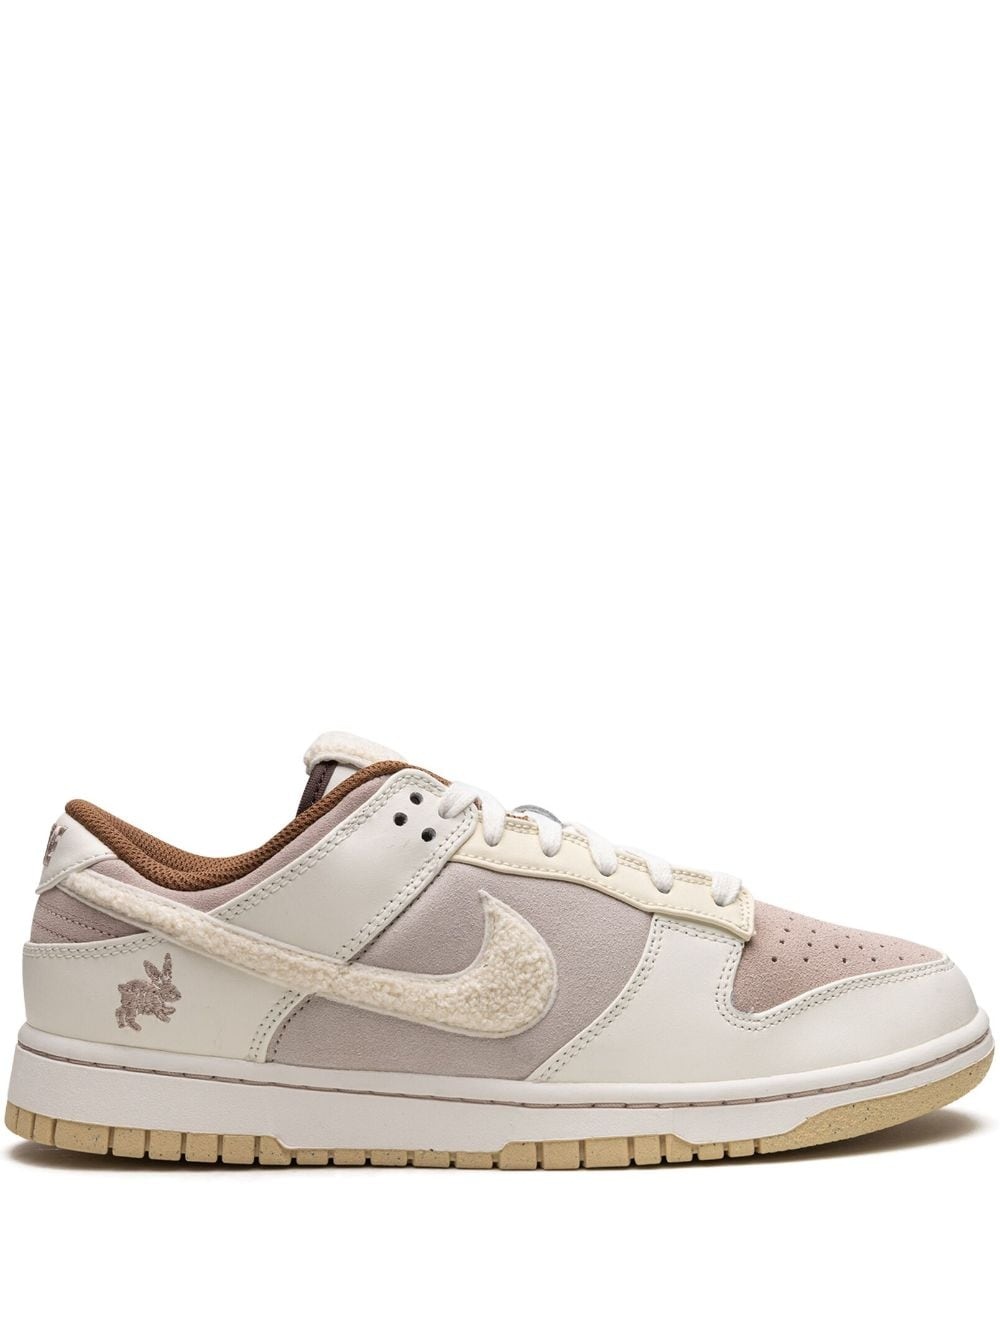 Dunk Low Retro PRM "Year Of The Rabbit" sneakers - 1